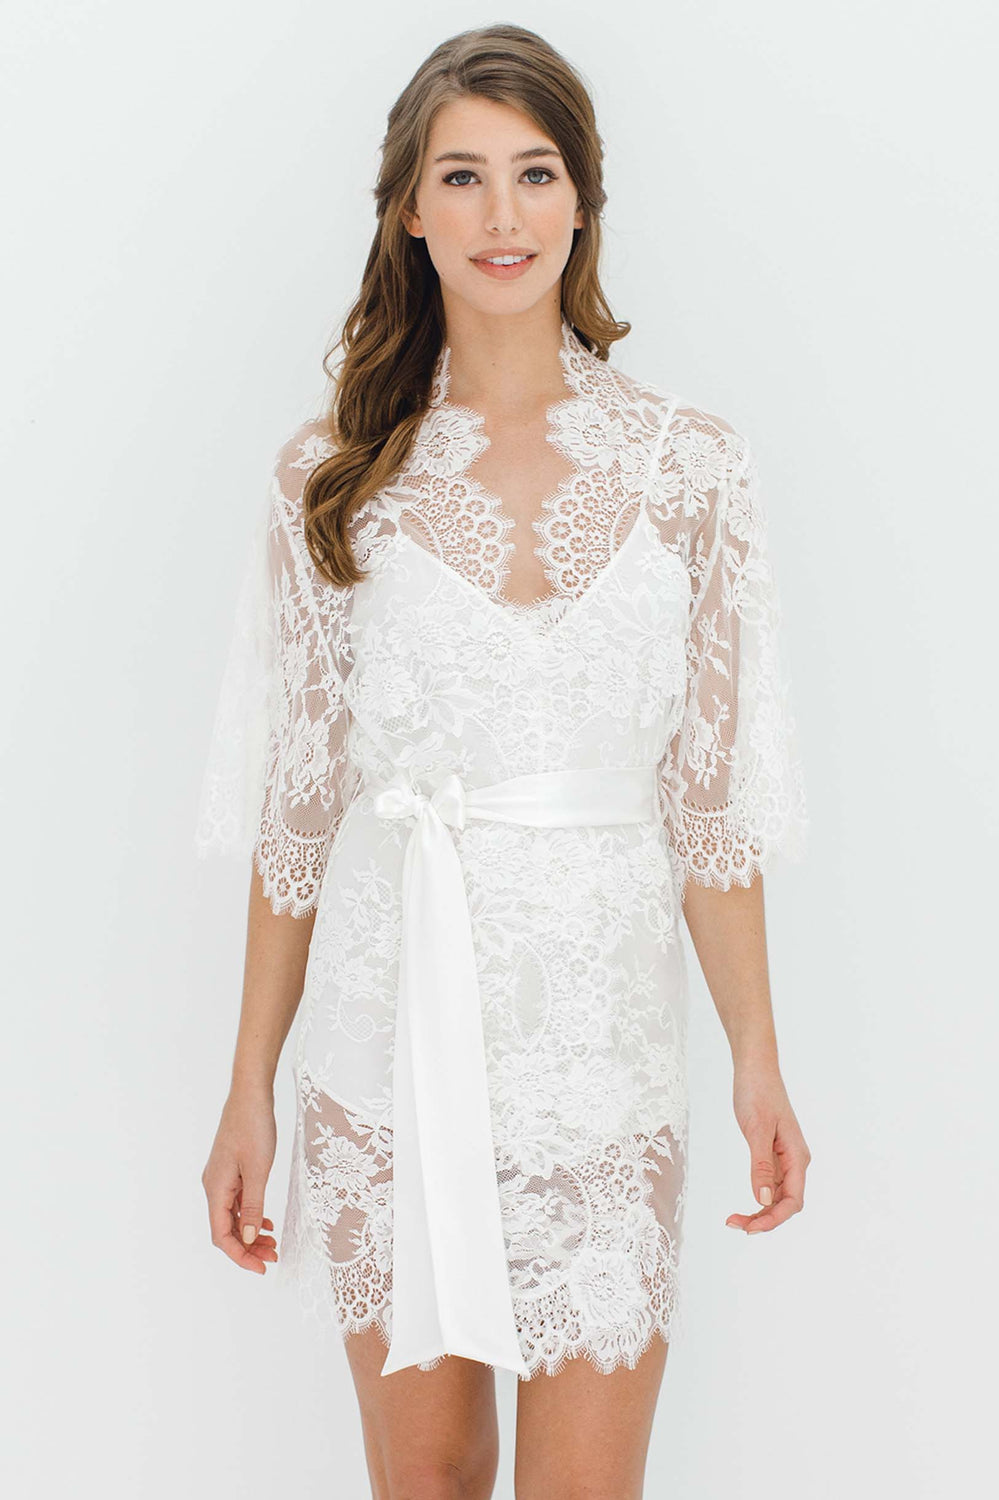 Swan Queen lace kimono bridal robe in ivory - Style 102SH ...